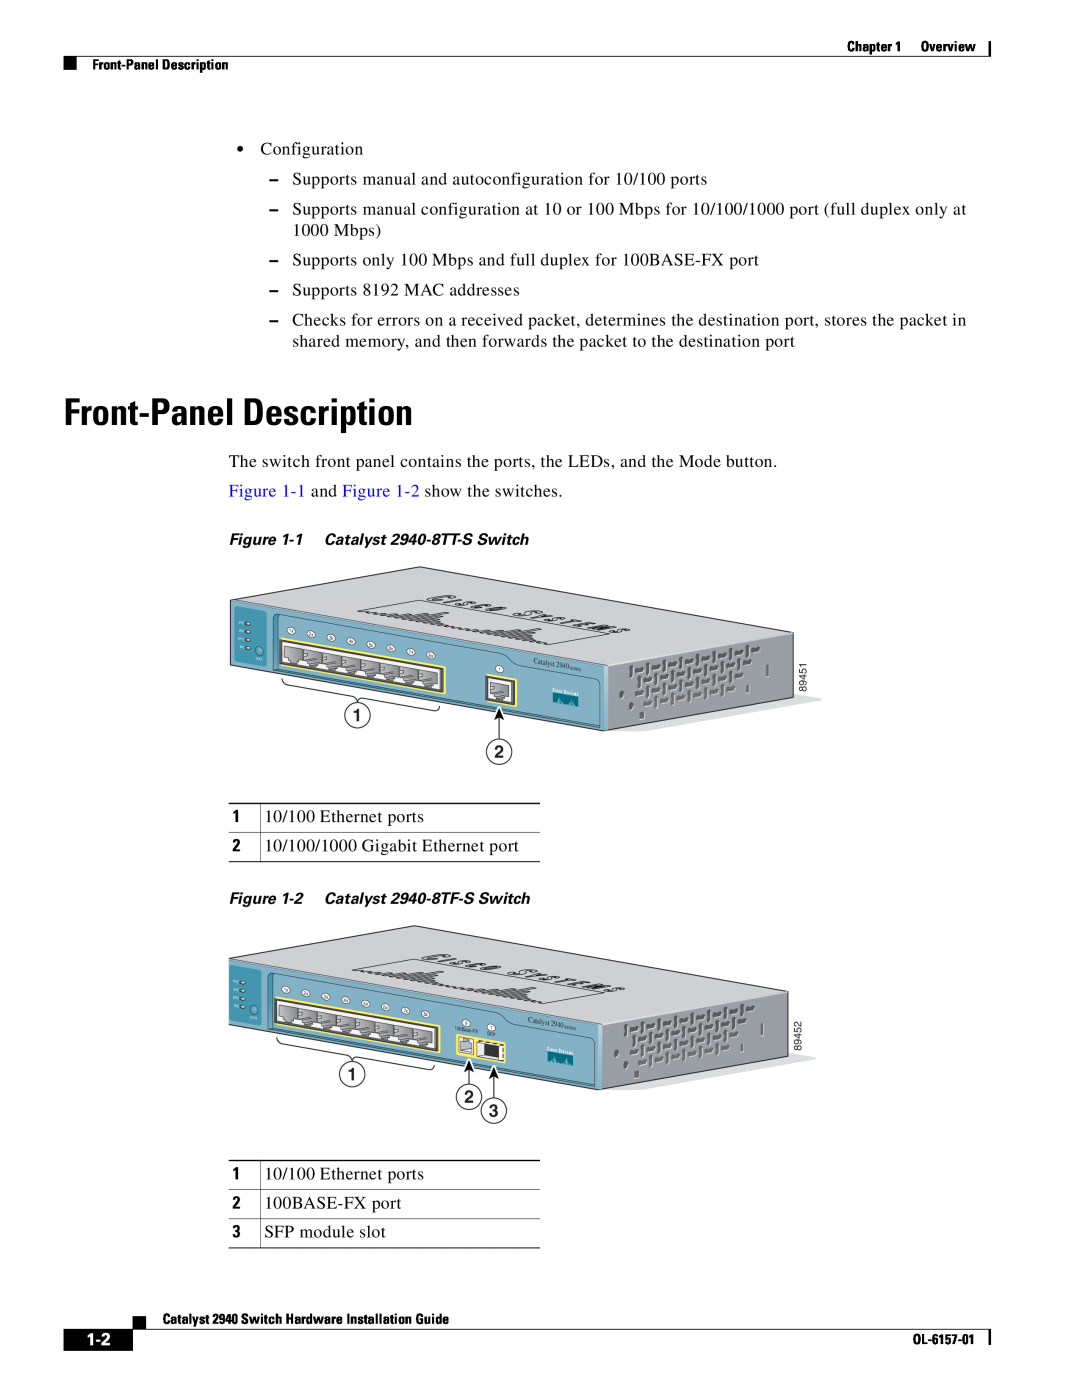 Cisco Systems OL-6157-01 manual Front-Panel Description, 1 and -2 show the switches 